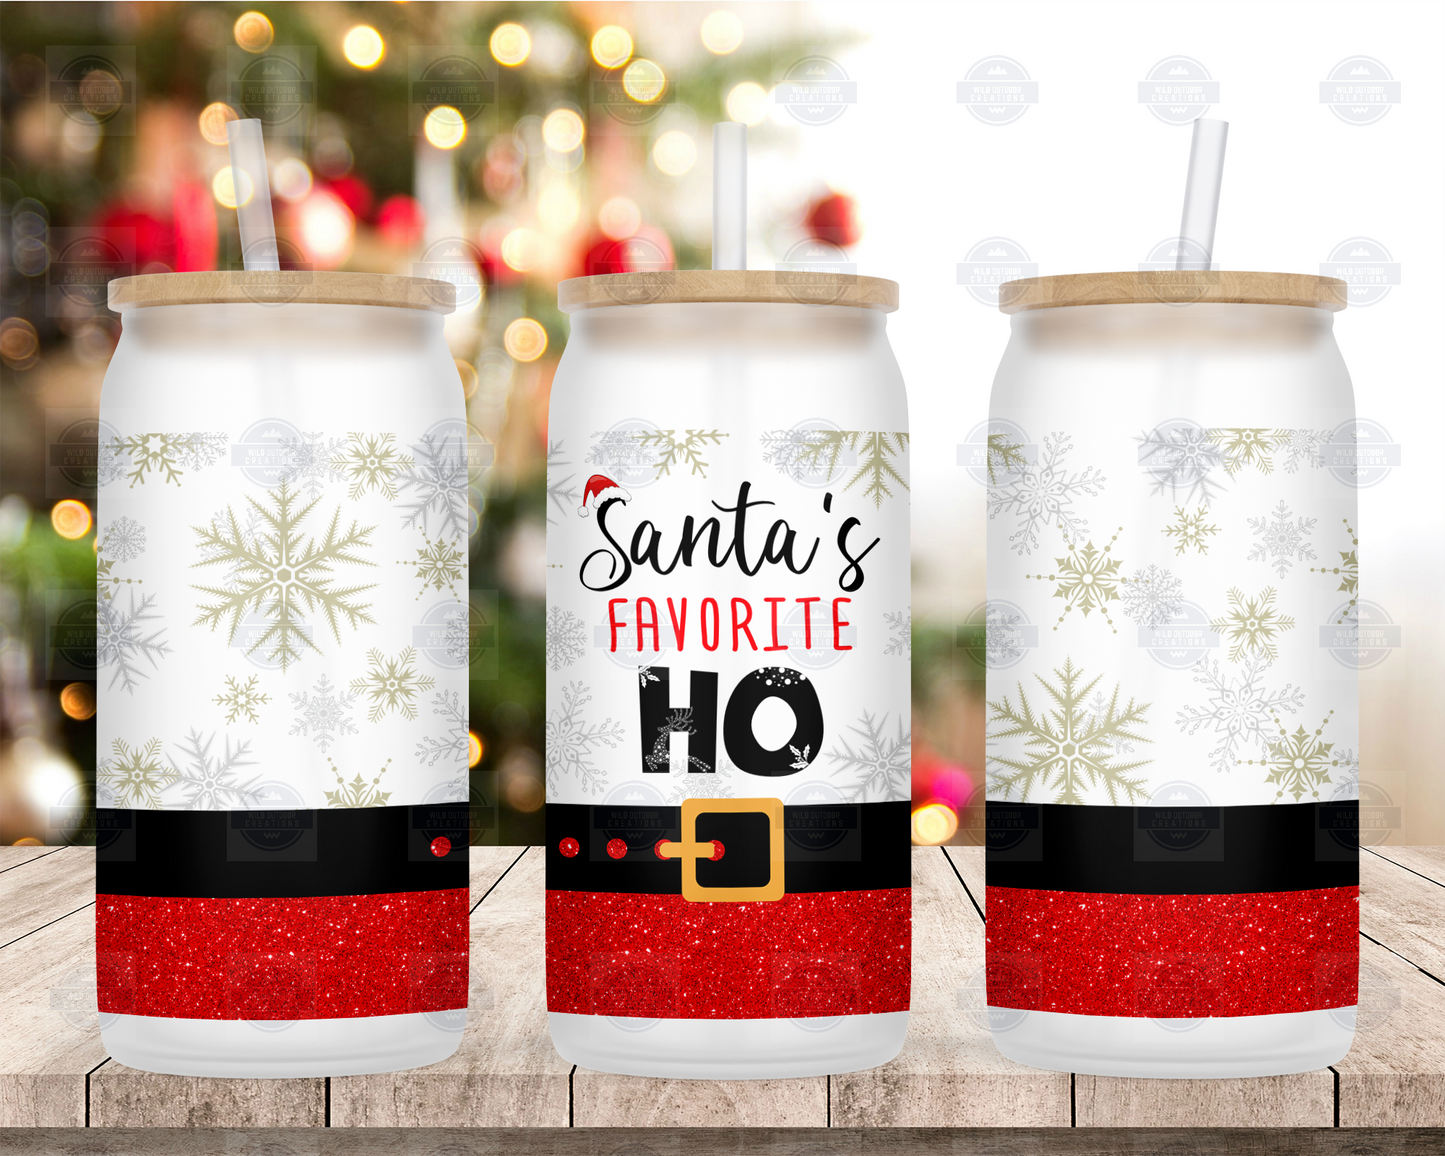 Santa's favorite ho 16oz frosted glass cup, Iced Coffee Cup